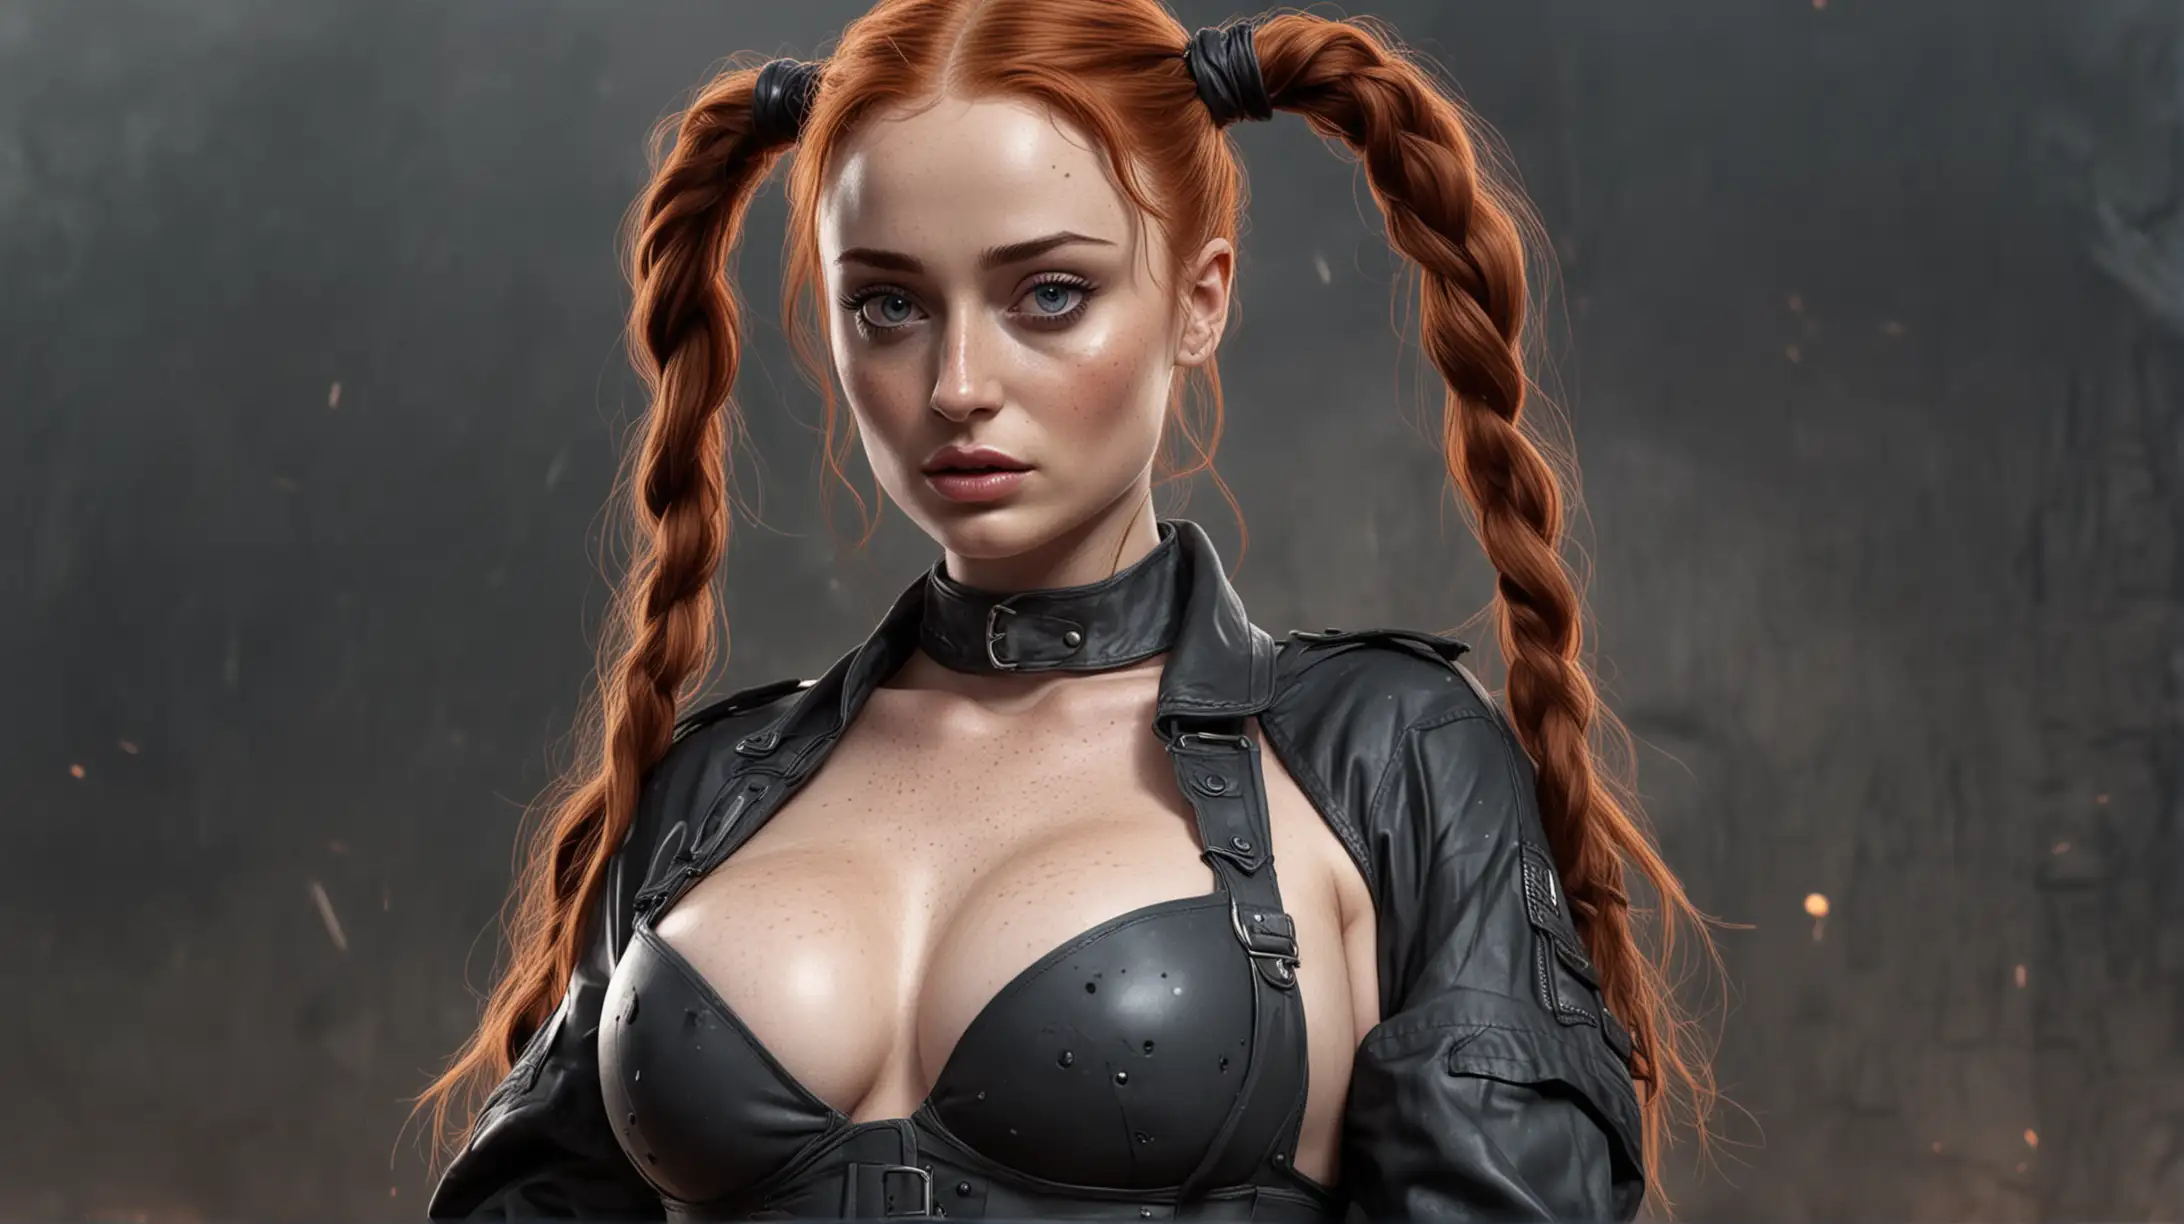 Sexy Cartoon Sophie Turner with Pigtails in Apocalyptic Setting